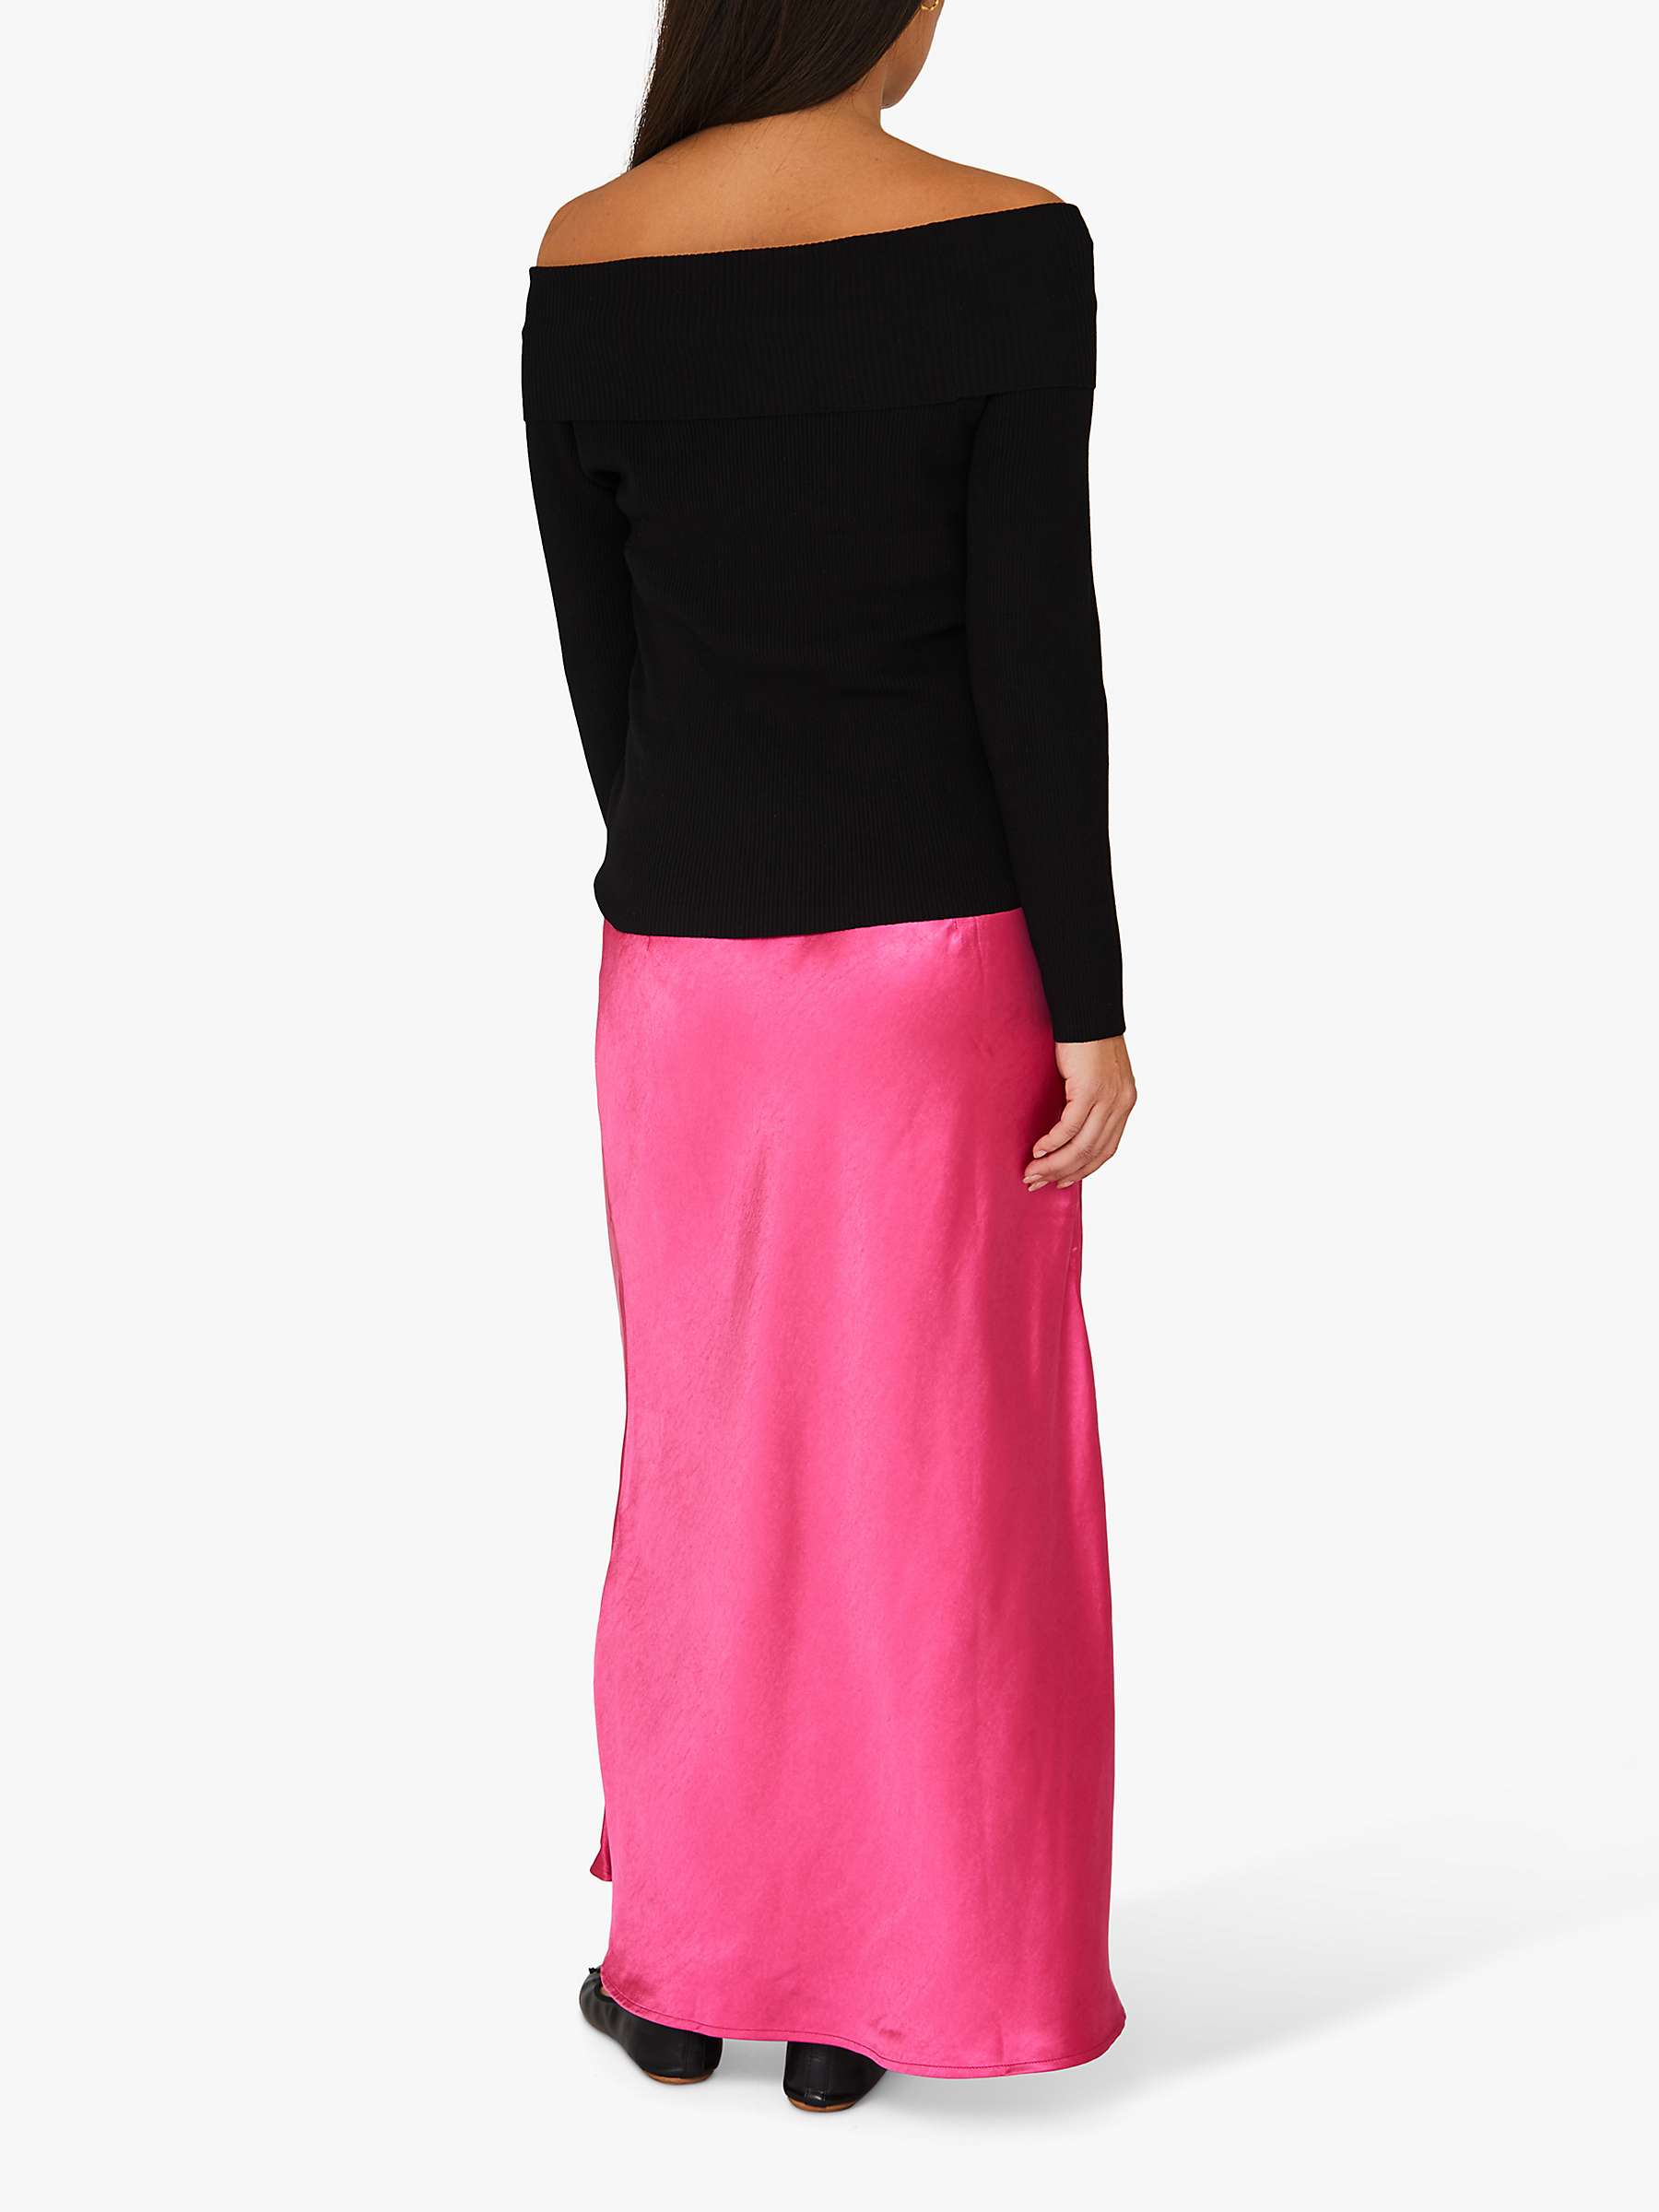 Buy A-VIEW Carry Sateen Skirt, Pink Online at johnlewis.com